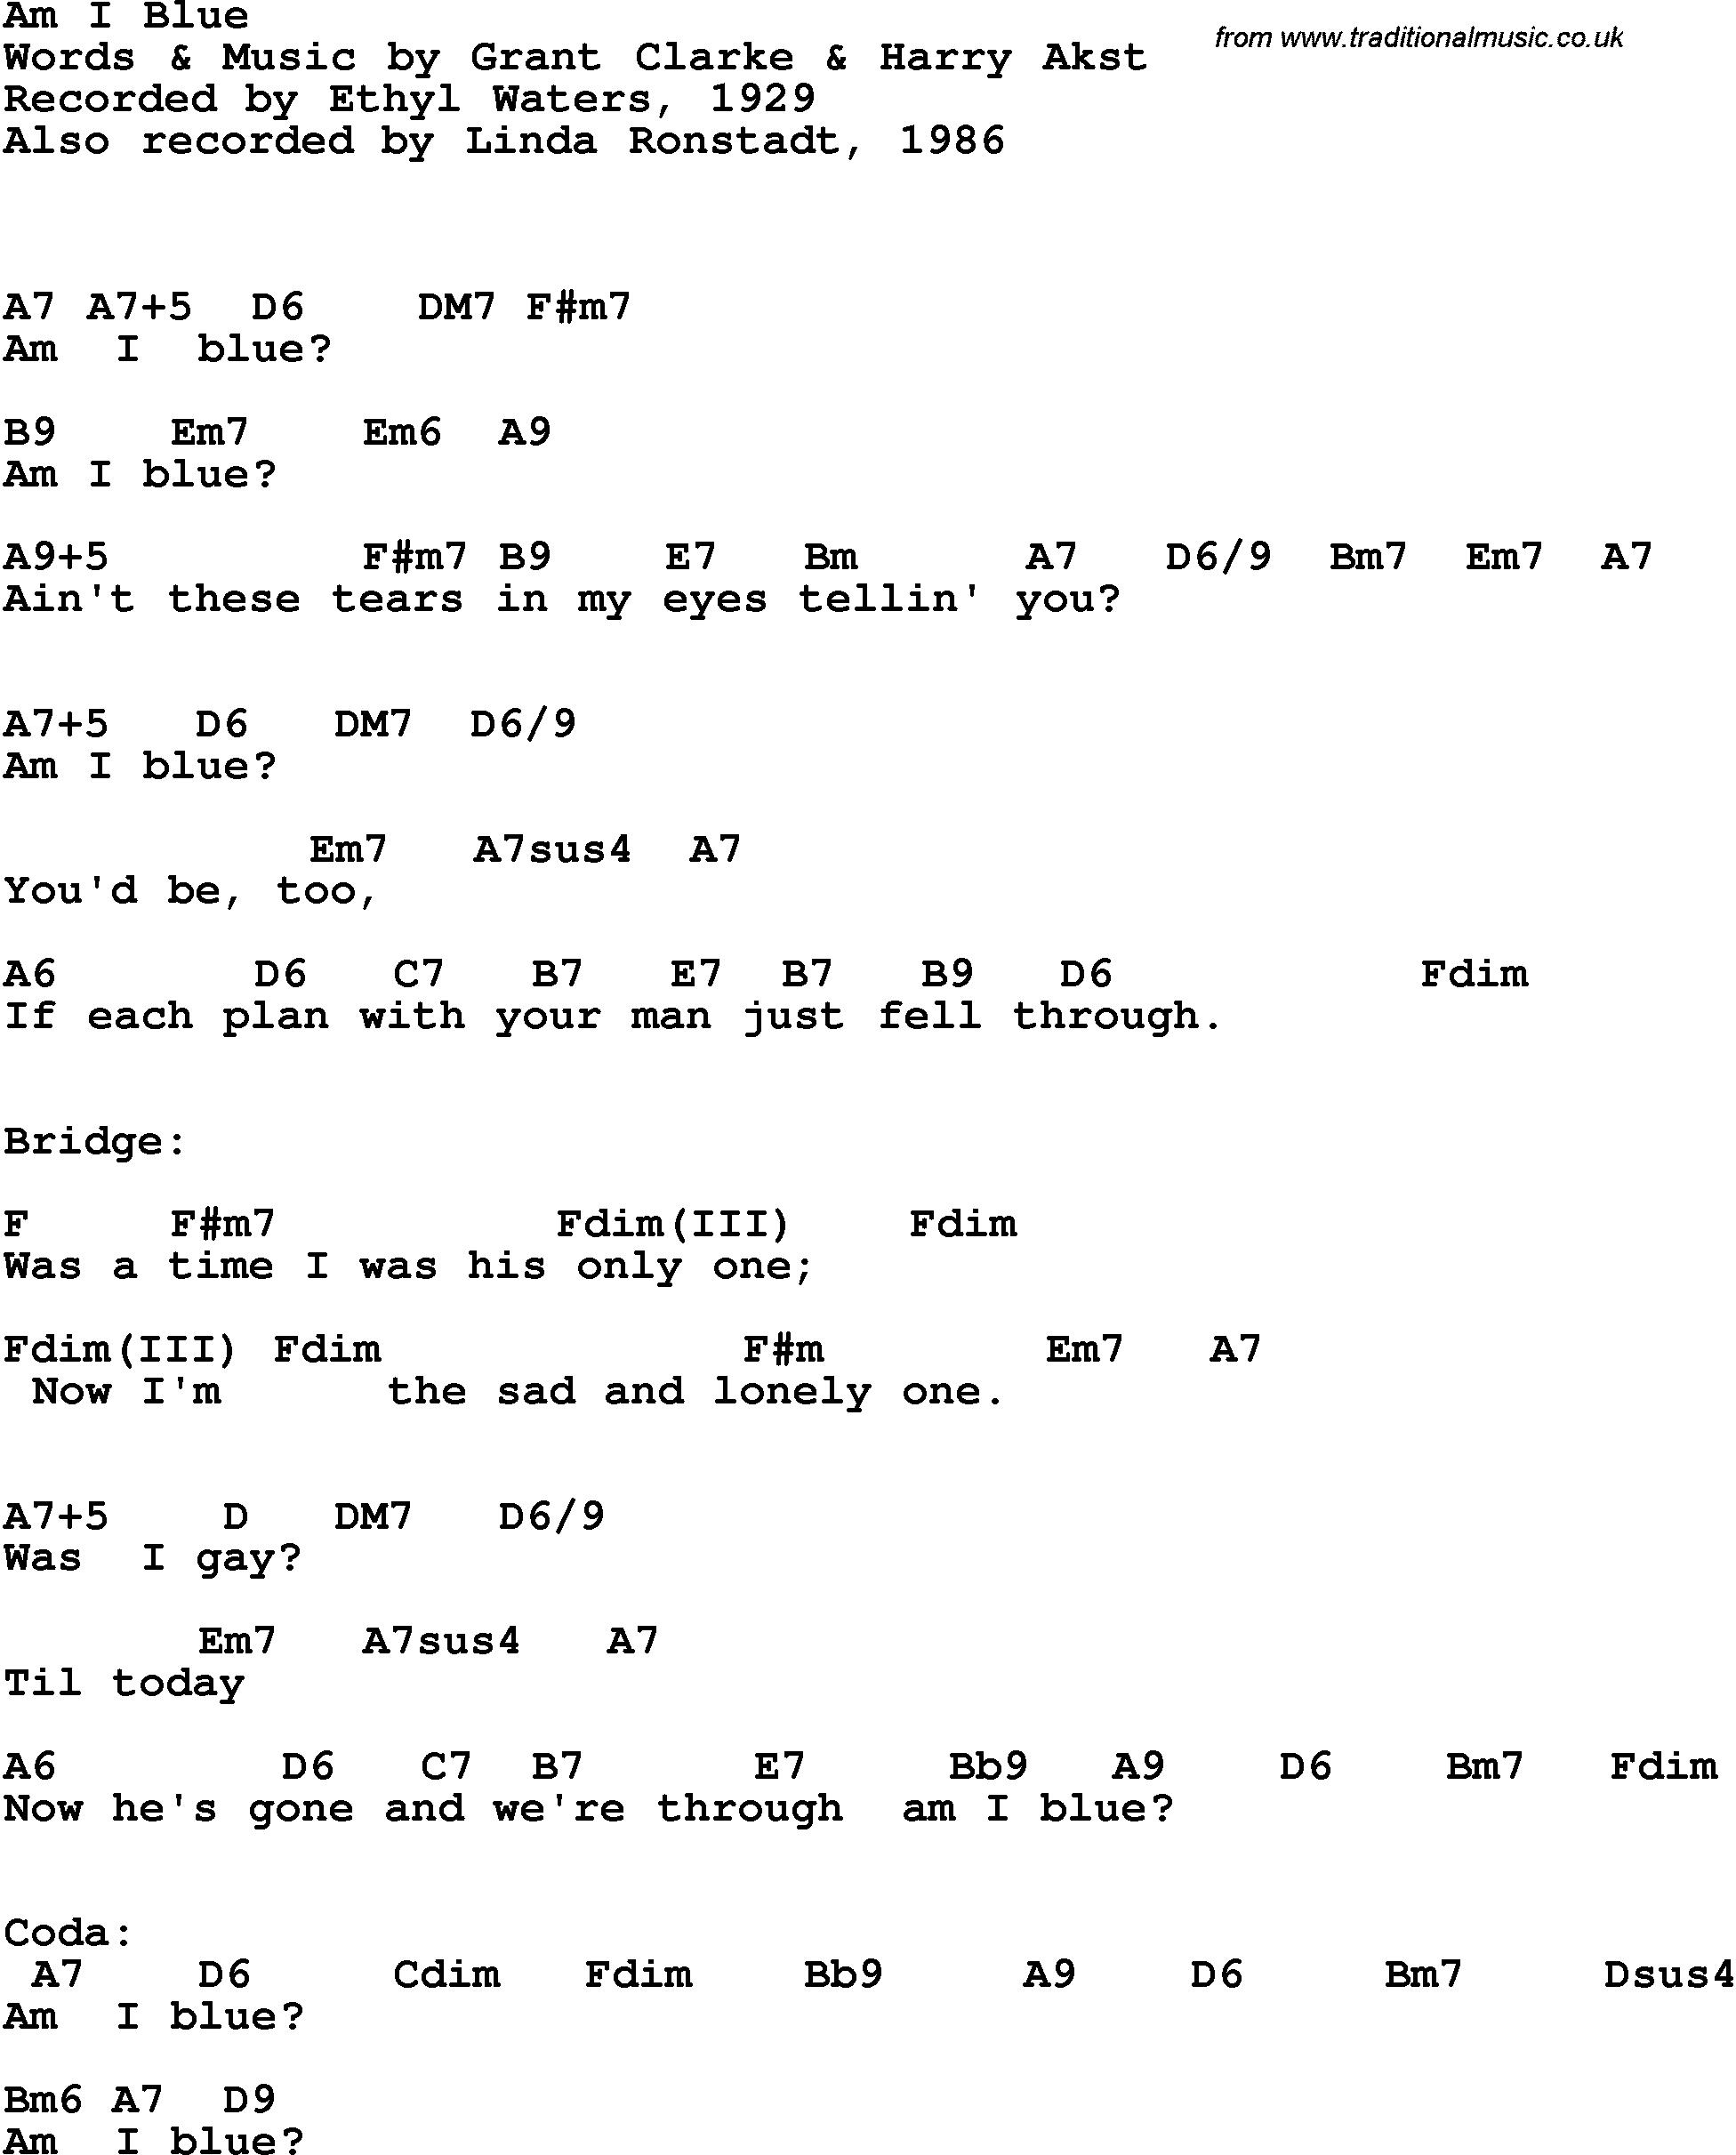 Song Lyrics with guitar chords for Am I Blue - Ethel Waters, 1929